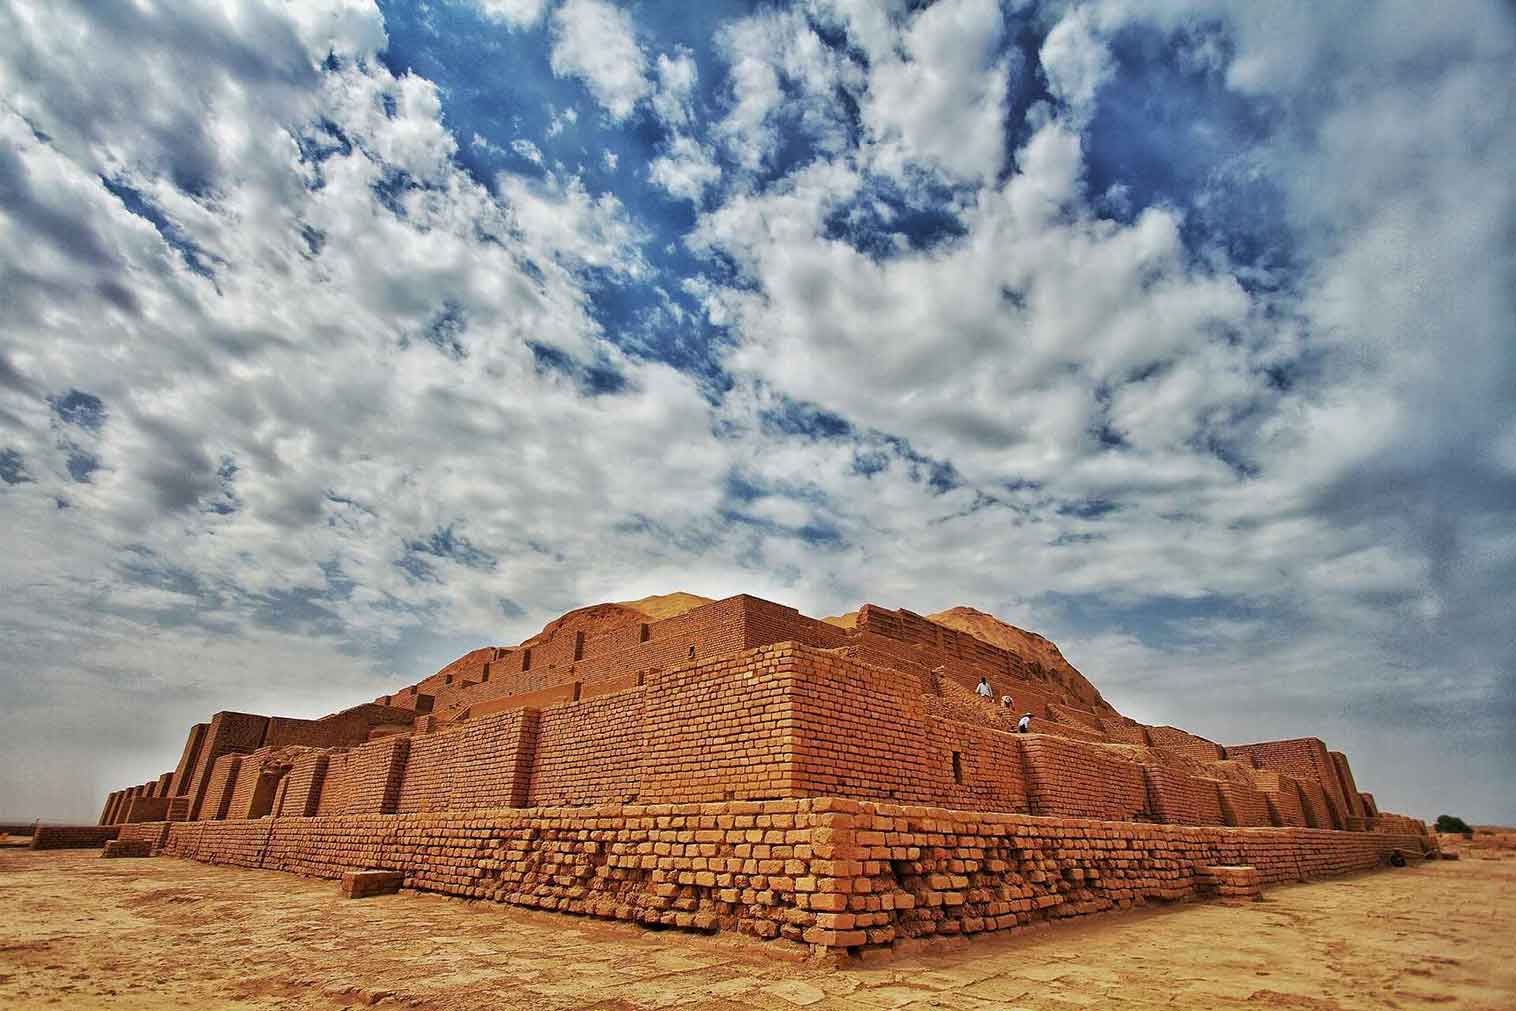 Chogha Zanbil is the first Iranian UNESCO world heritage site